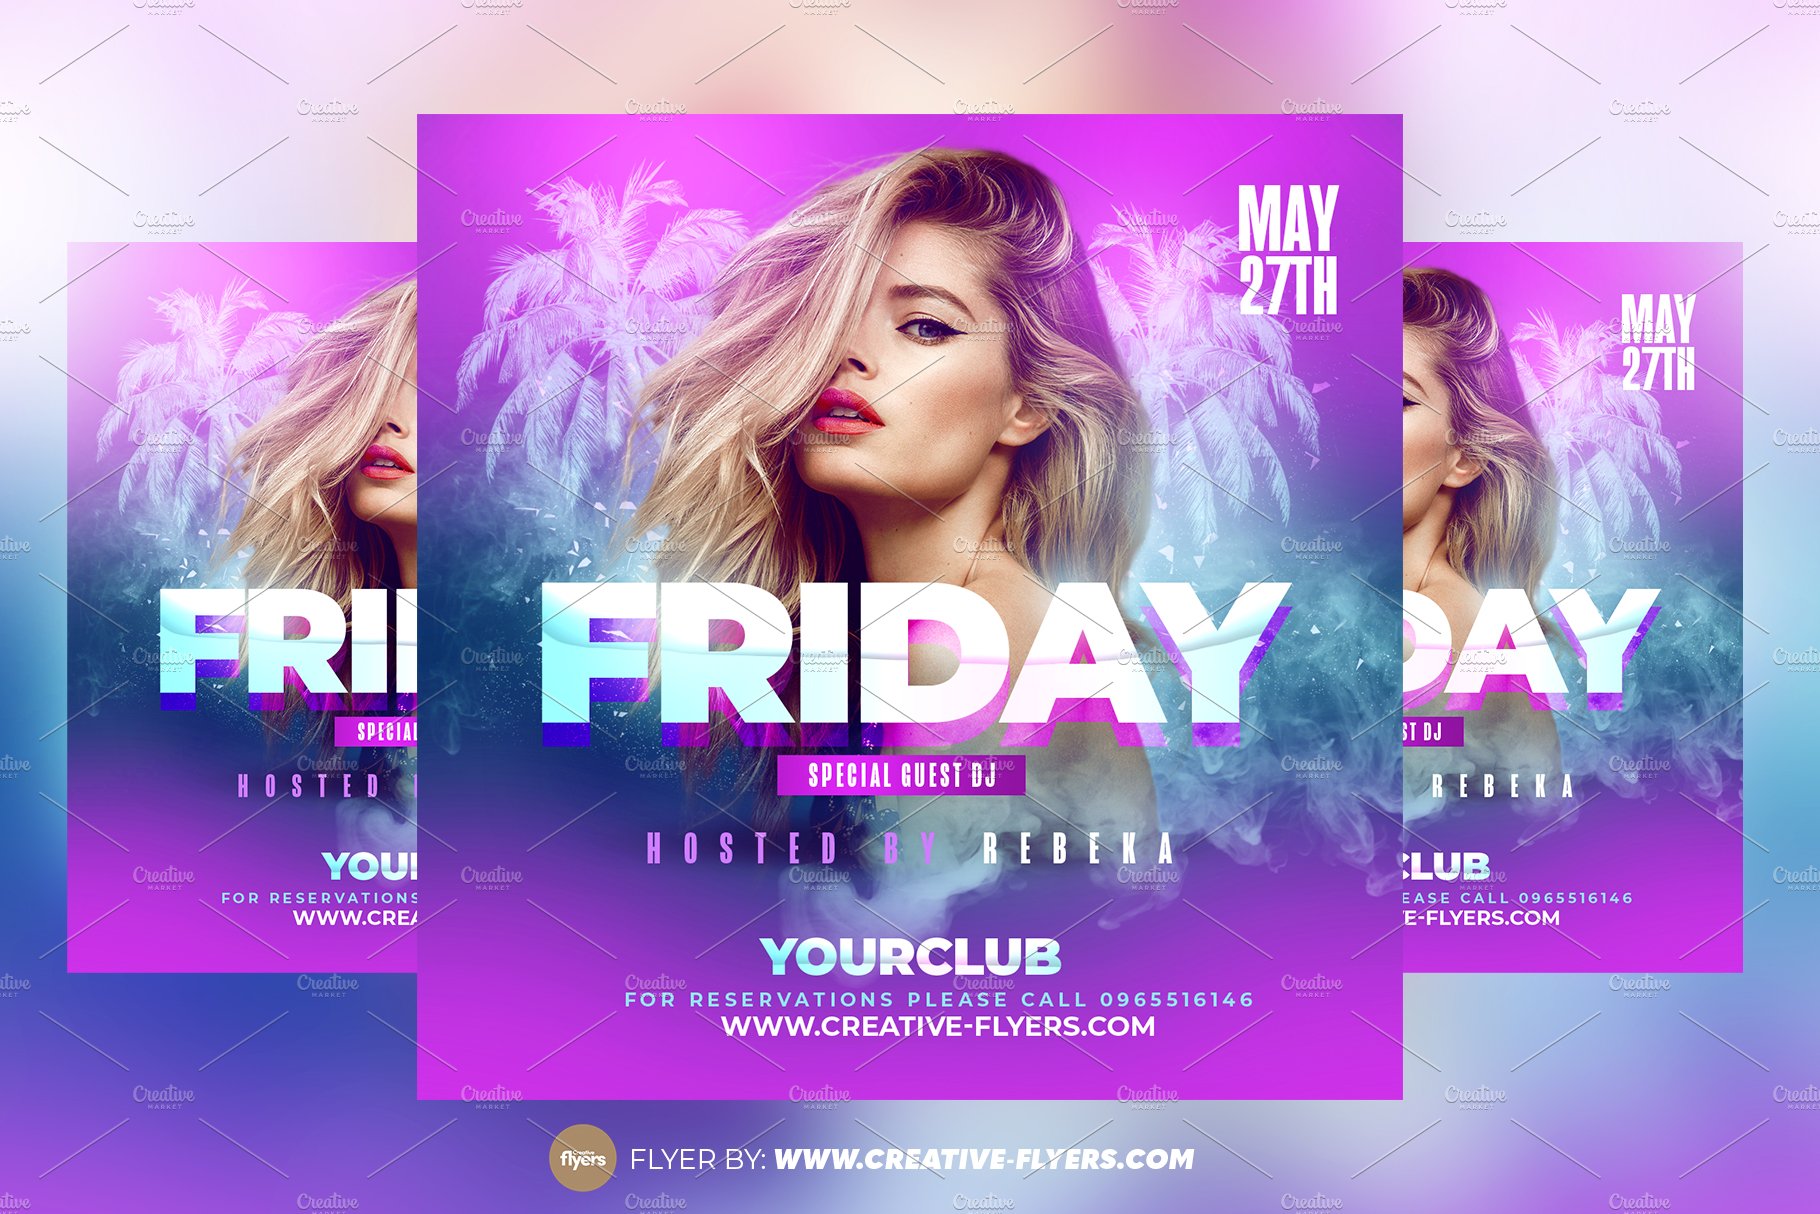 Club Party Flyer Template cover image.